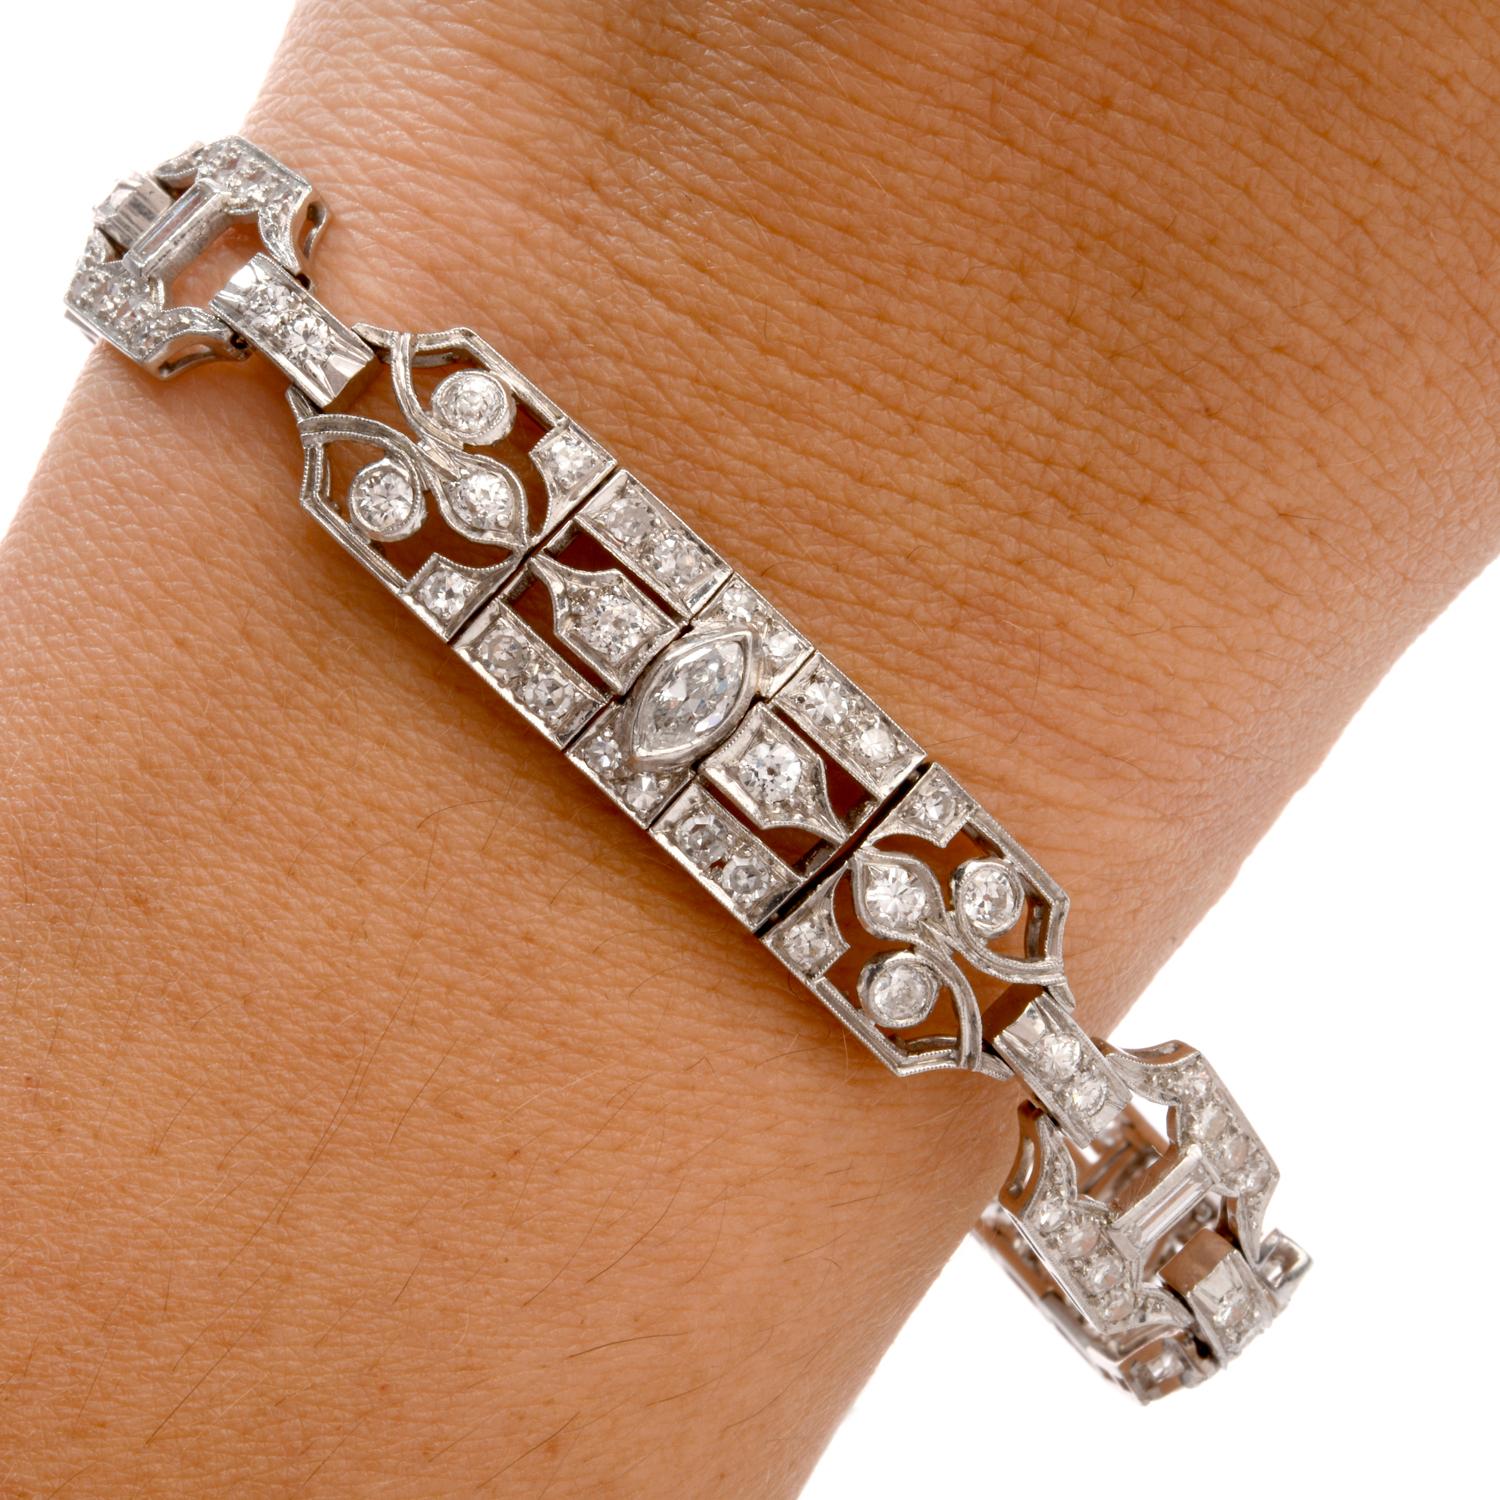 This Round, Marquise and Baguette cut Diamond Bracelet was inspired in an Art Deco geometric motif and crafted in Platinum. Intricate details and milgrain beading finish out the links filled with  a variety of cut Diamonds. Diamonds collectively